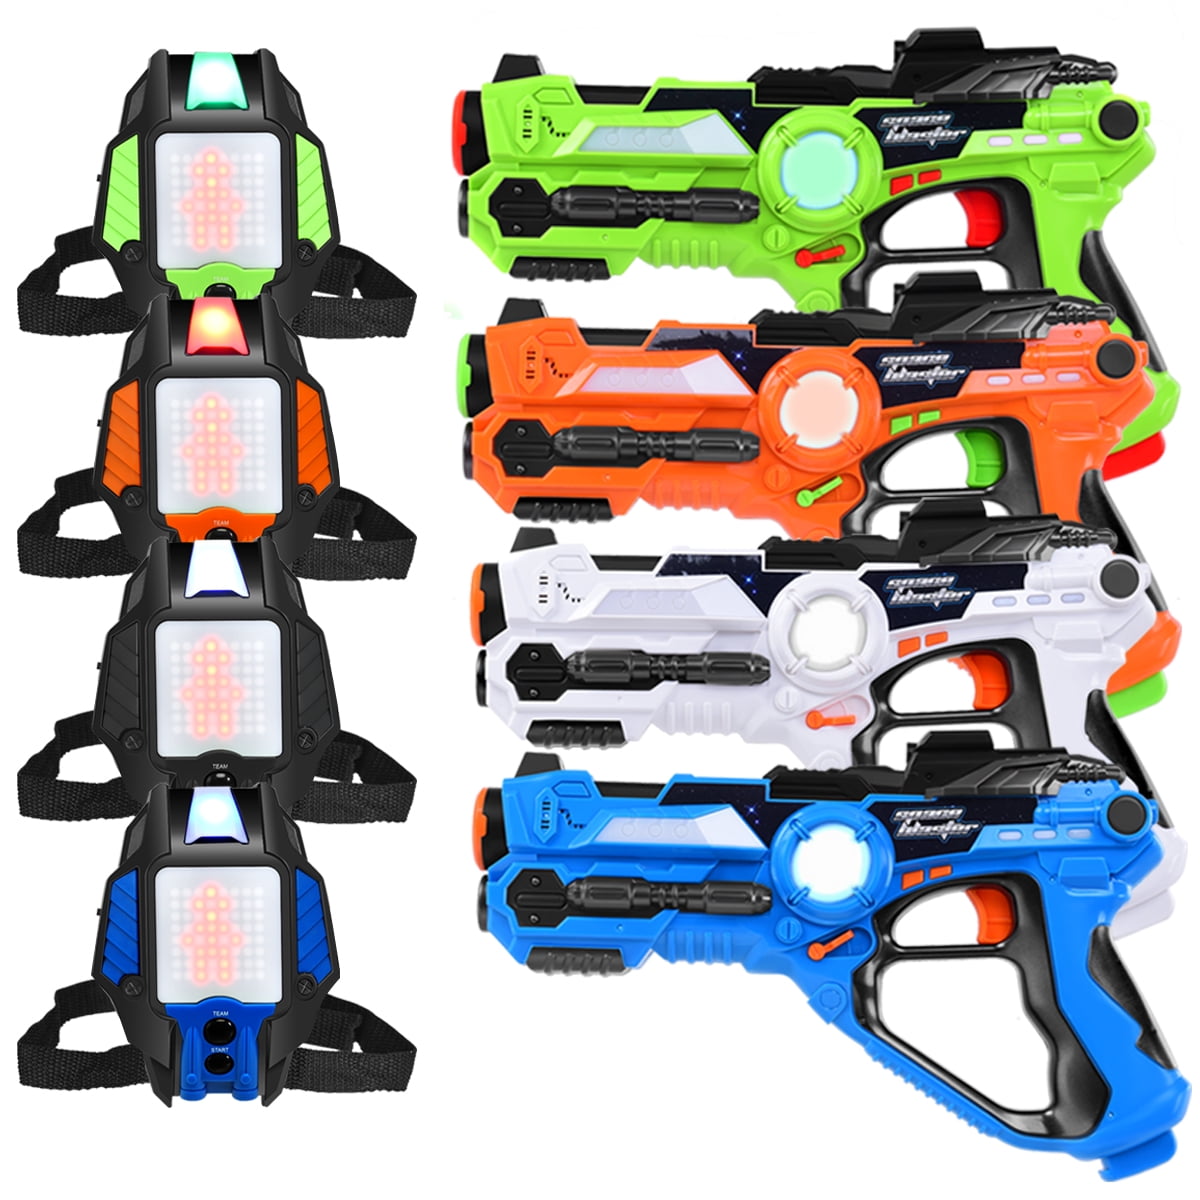 2Pcs Infrared Laser Tag Blaster With 2 Target Vests Outdoor Family Activity F1K0 